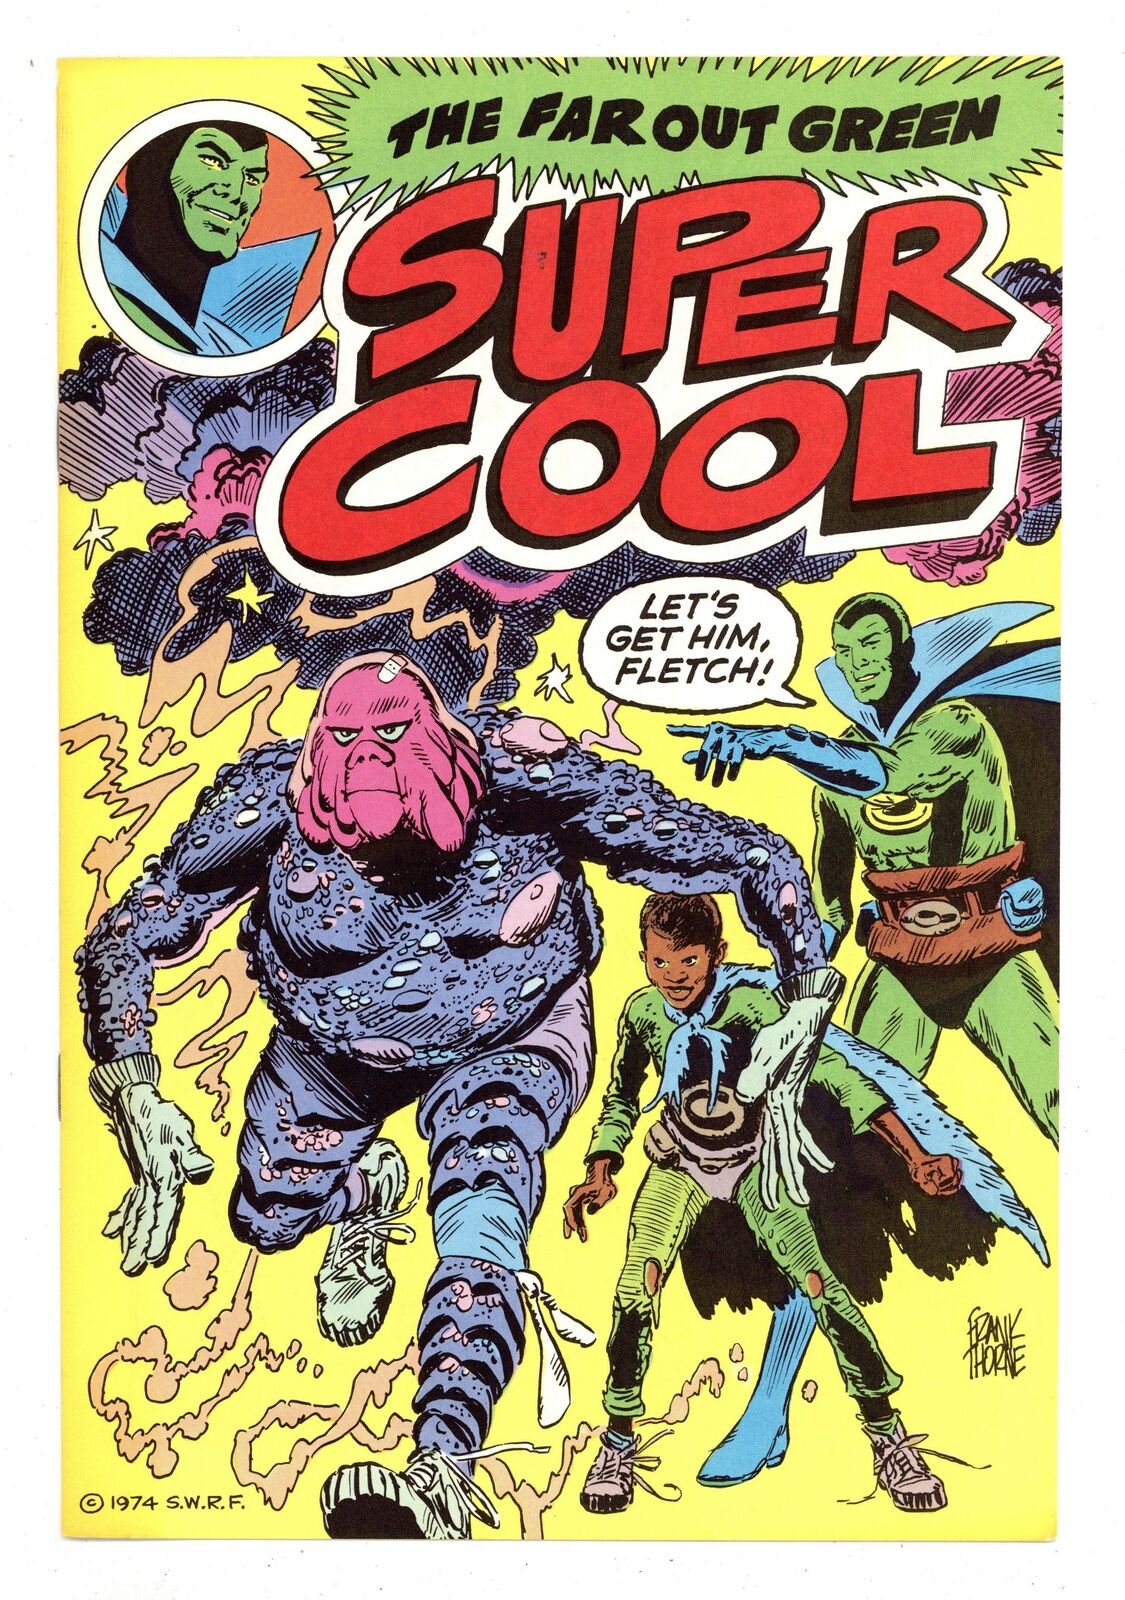 Far Out Green Super Cool #4 VF+ 8.5 1974